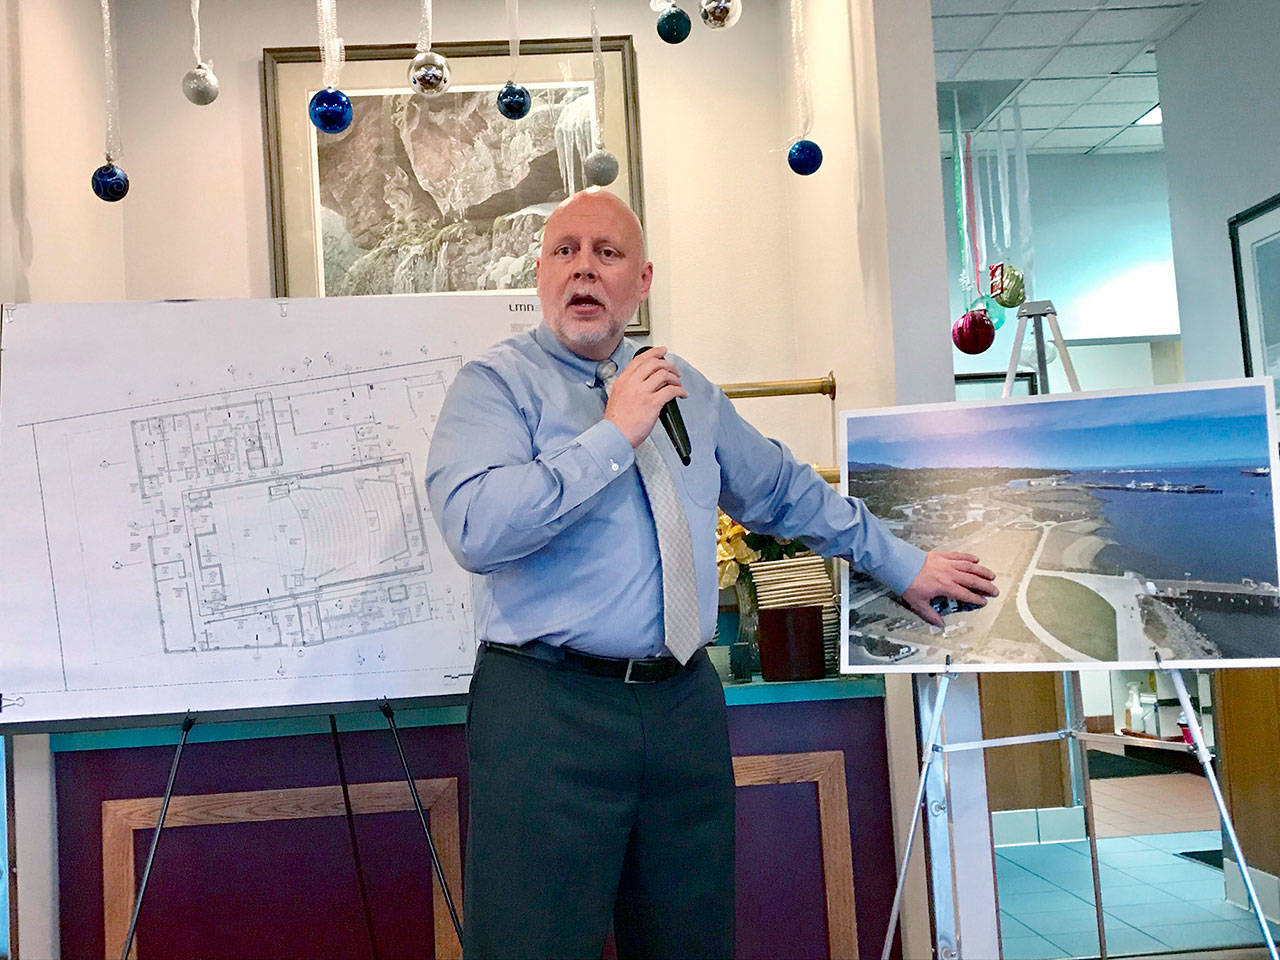 Chris Fidler, executive director of the Port Angeles Waterfront Center, told a business group Tuesday that construction of the center is on track to begin in August 2019. (Paul Gottlieb/Peninsula Daily News)